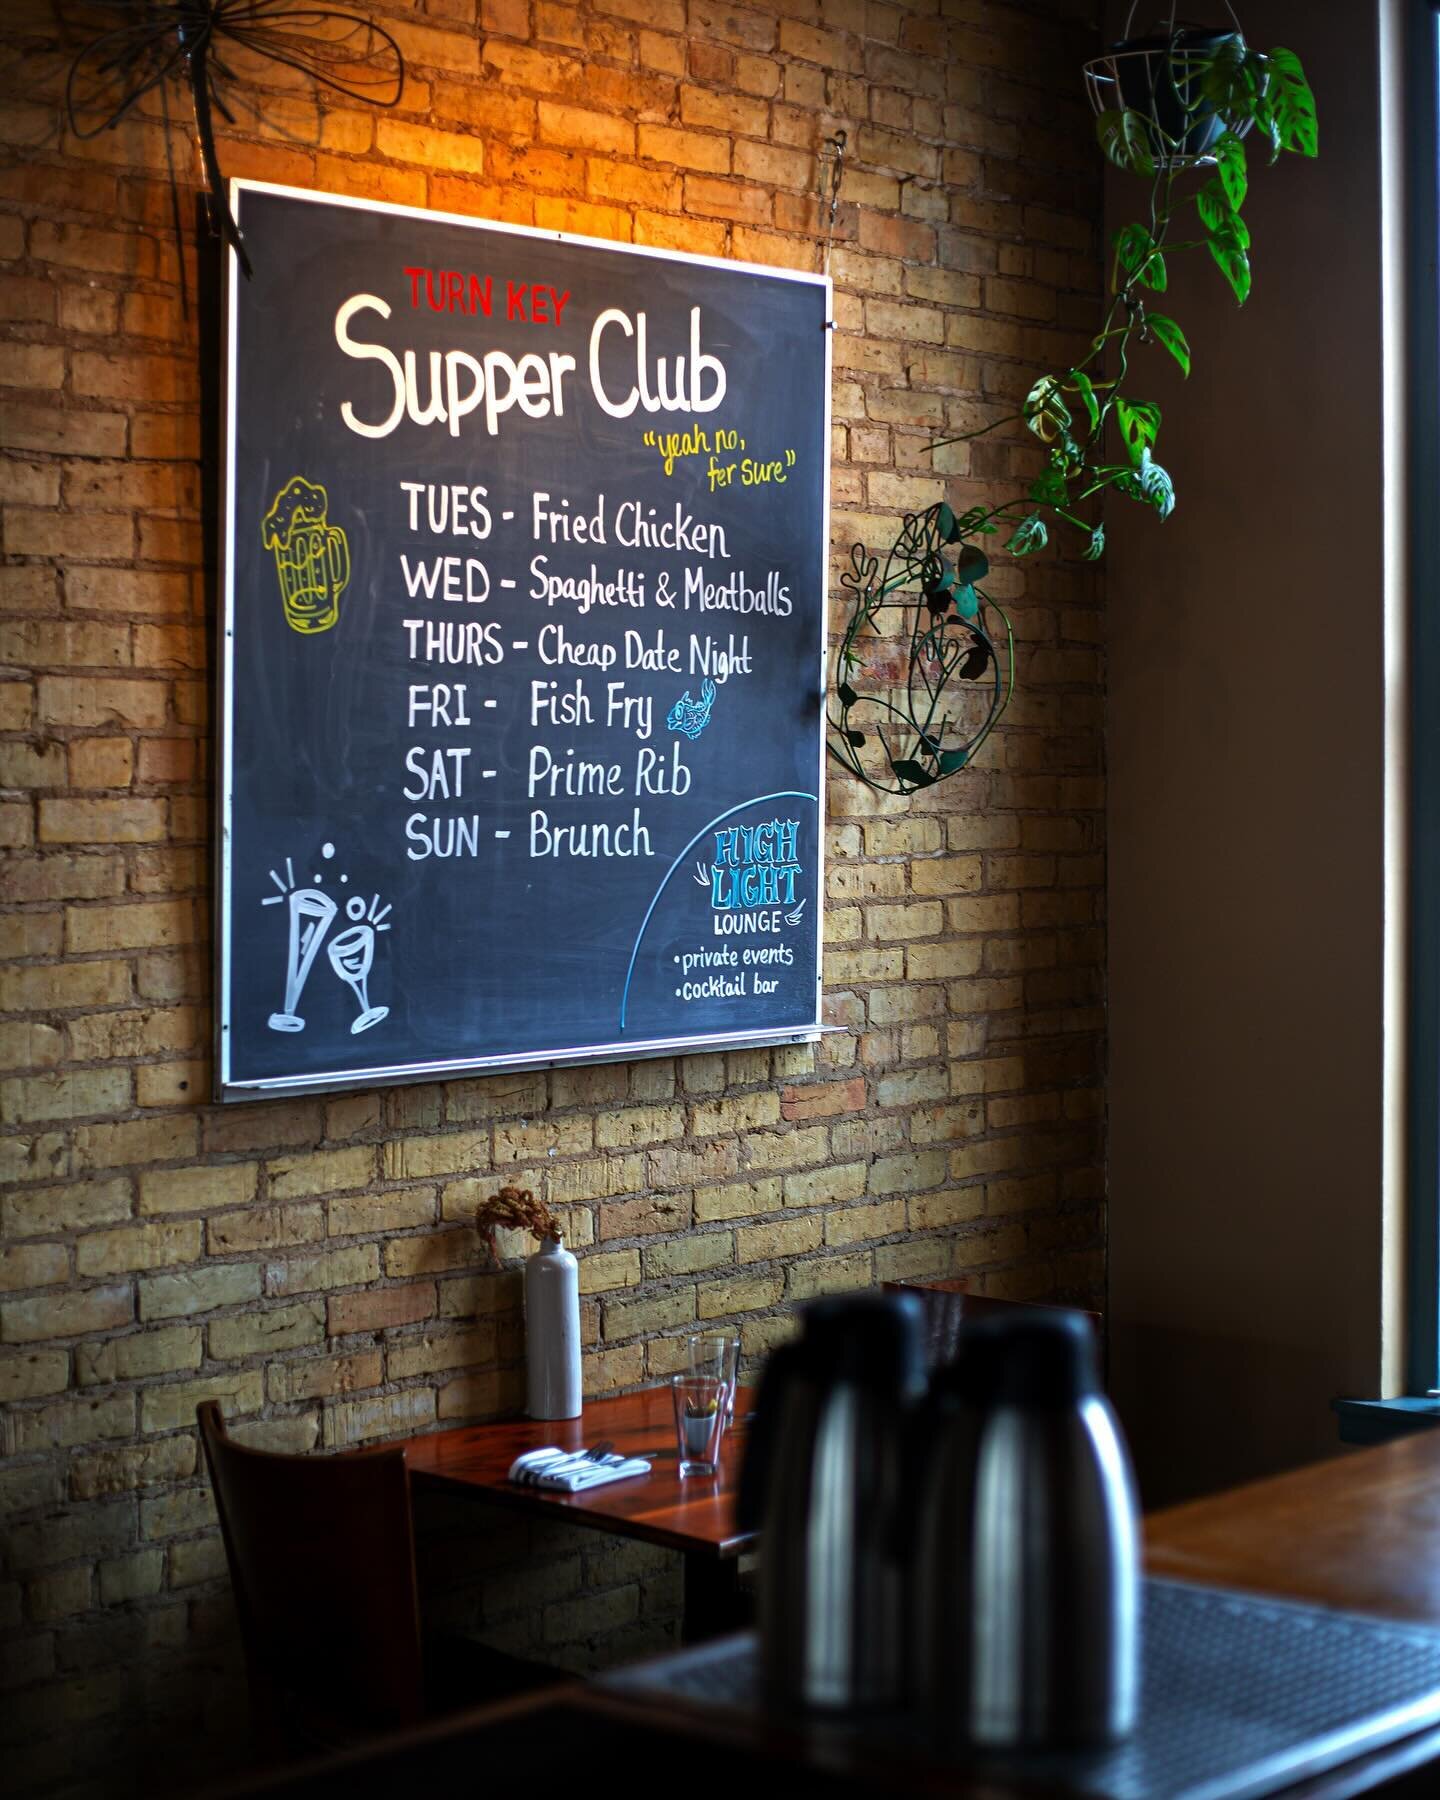 Howdy! This post is simply a thank you to all of you for coming out to support our supper club! This past week in particular was a blast getting to know new people and an absolute joy seeing regulars return to their favorite seats! Thank you for visi